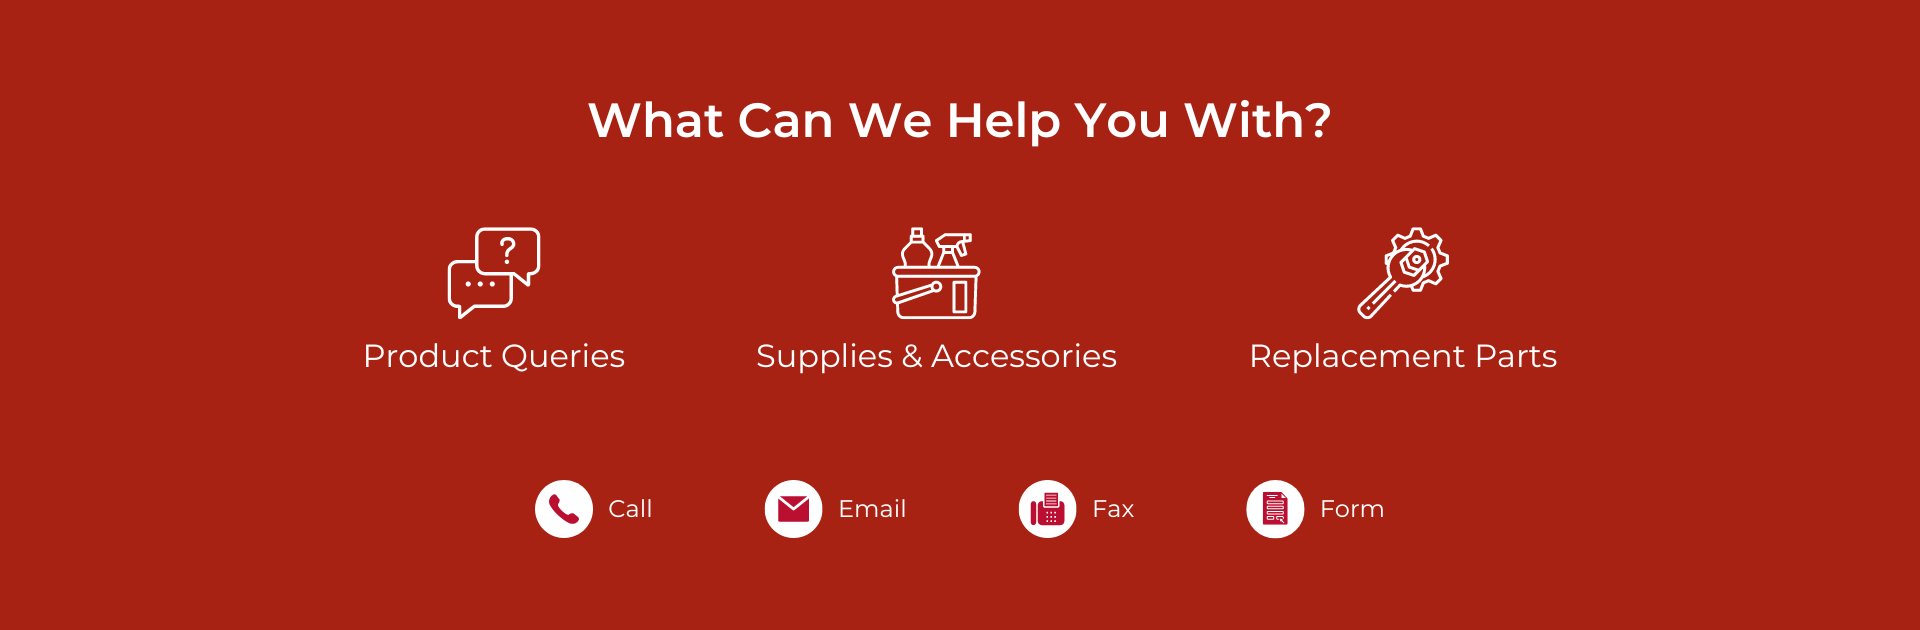 Contact us for HSM shredders supplies, accessories & parts